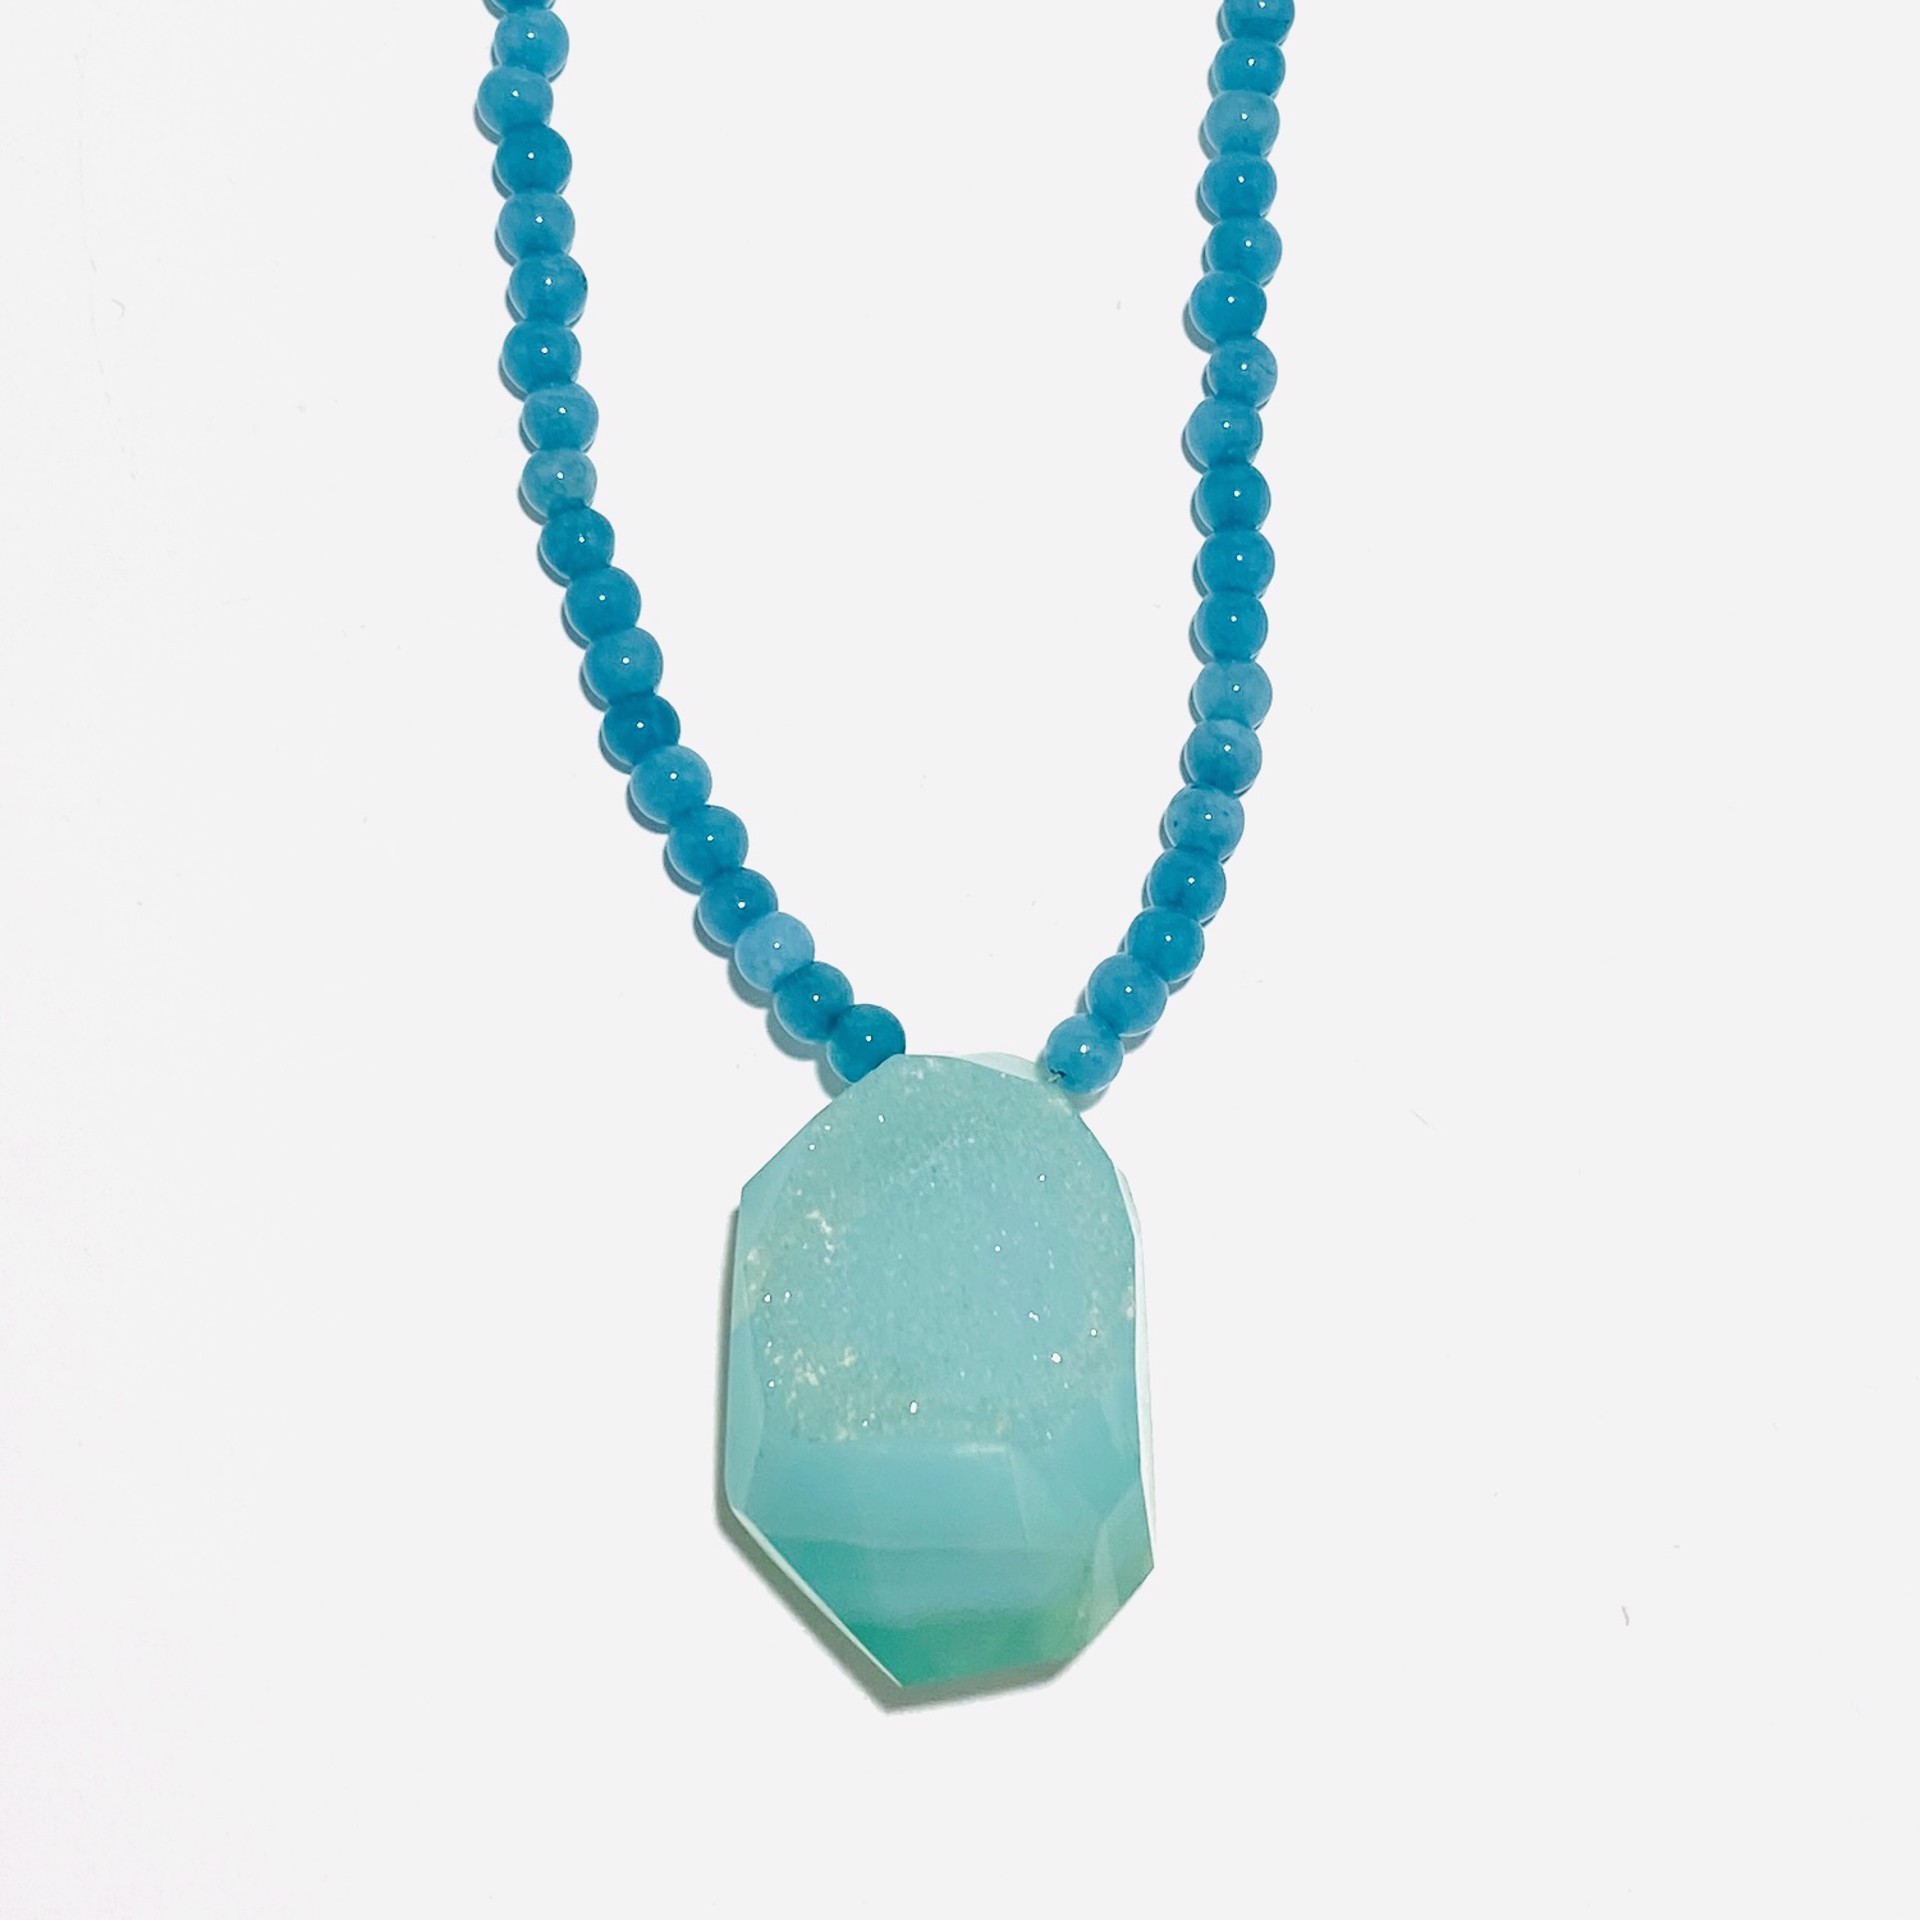 Teal Jade Large Natural Aqua Druzy Focal Necklace by Nance Trueworthy